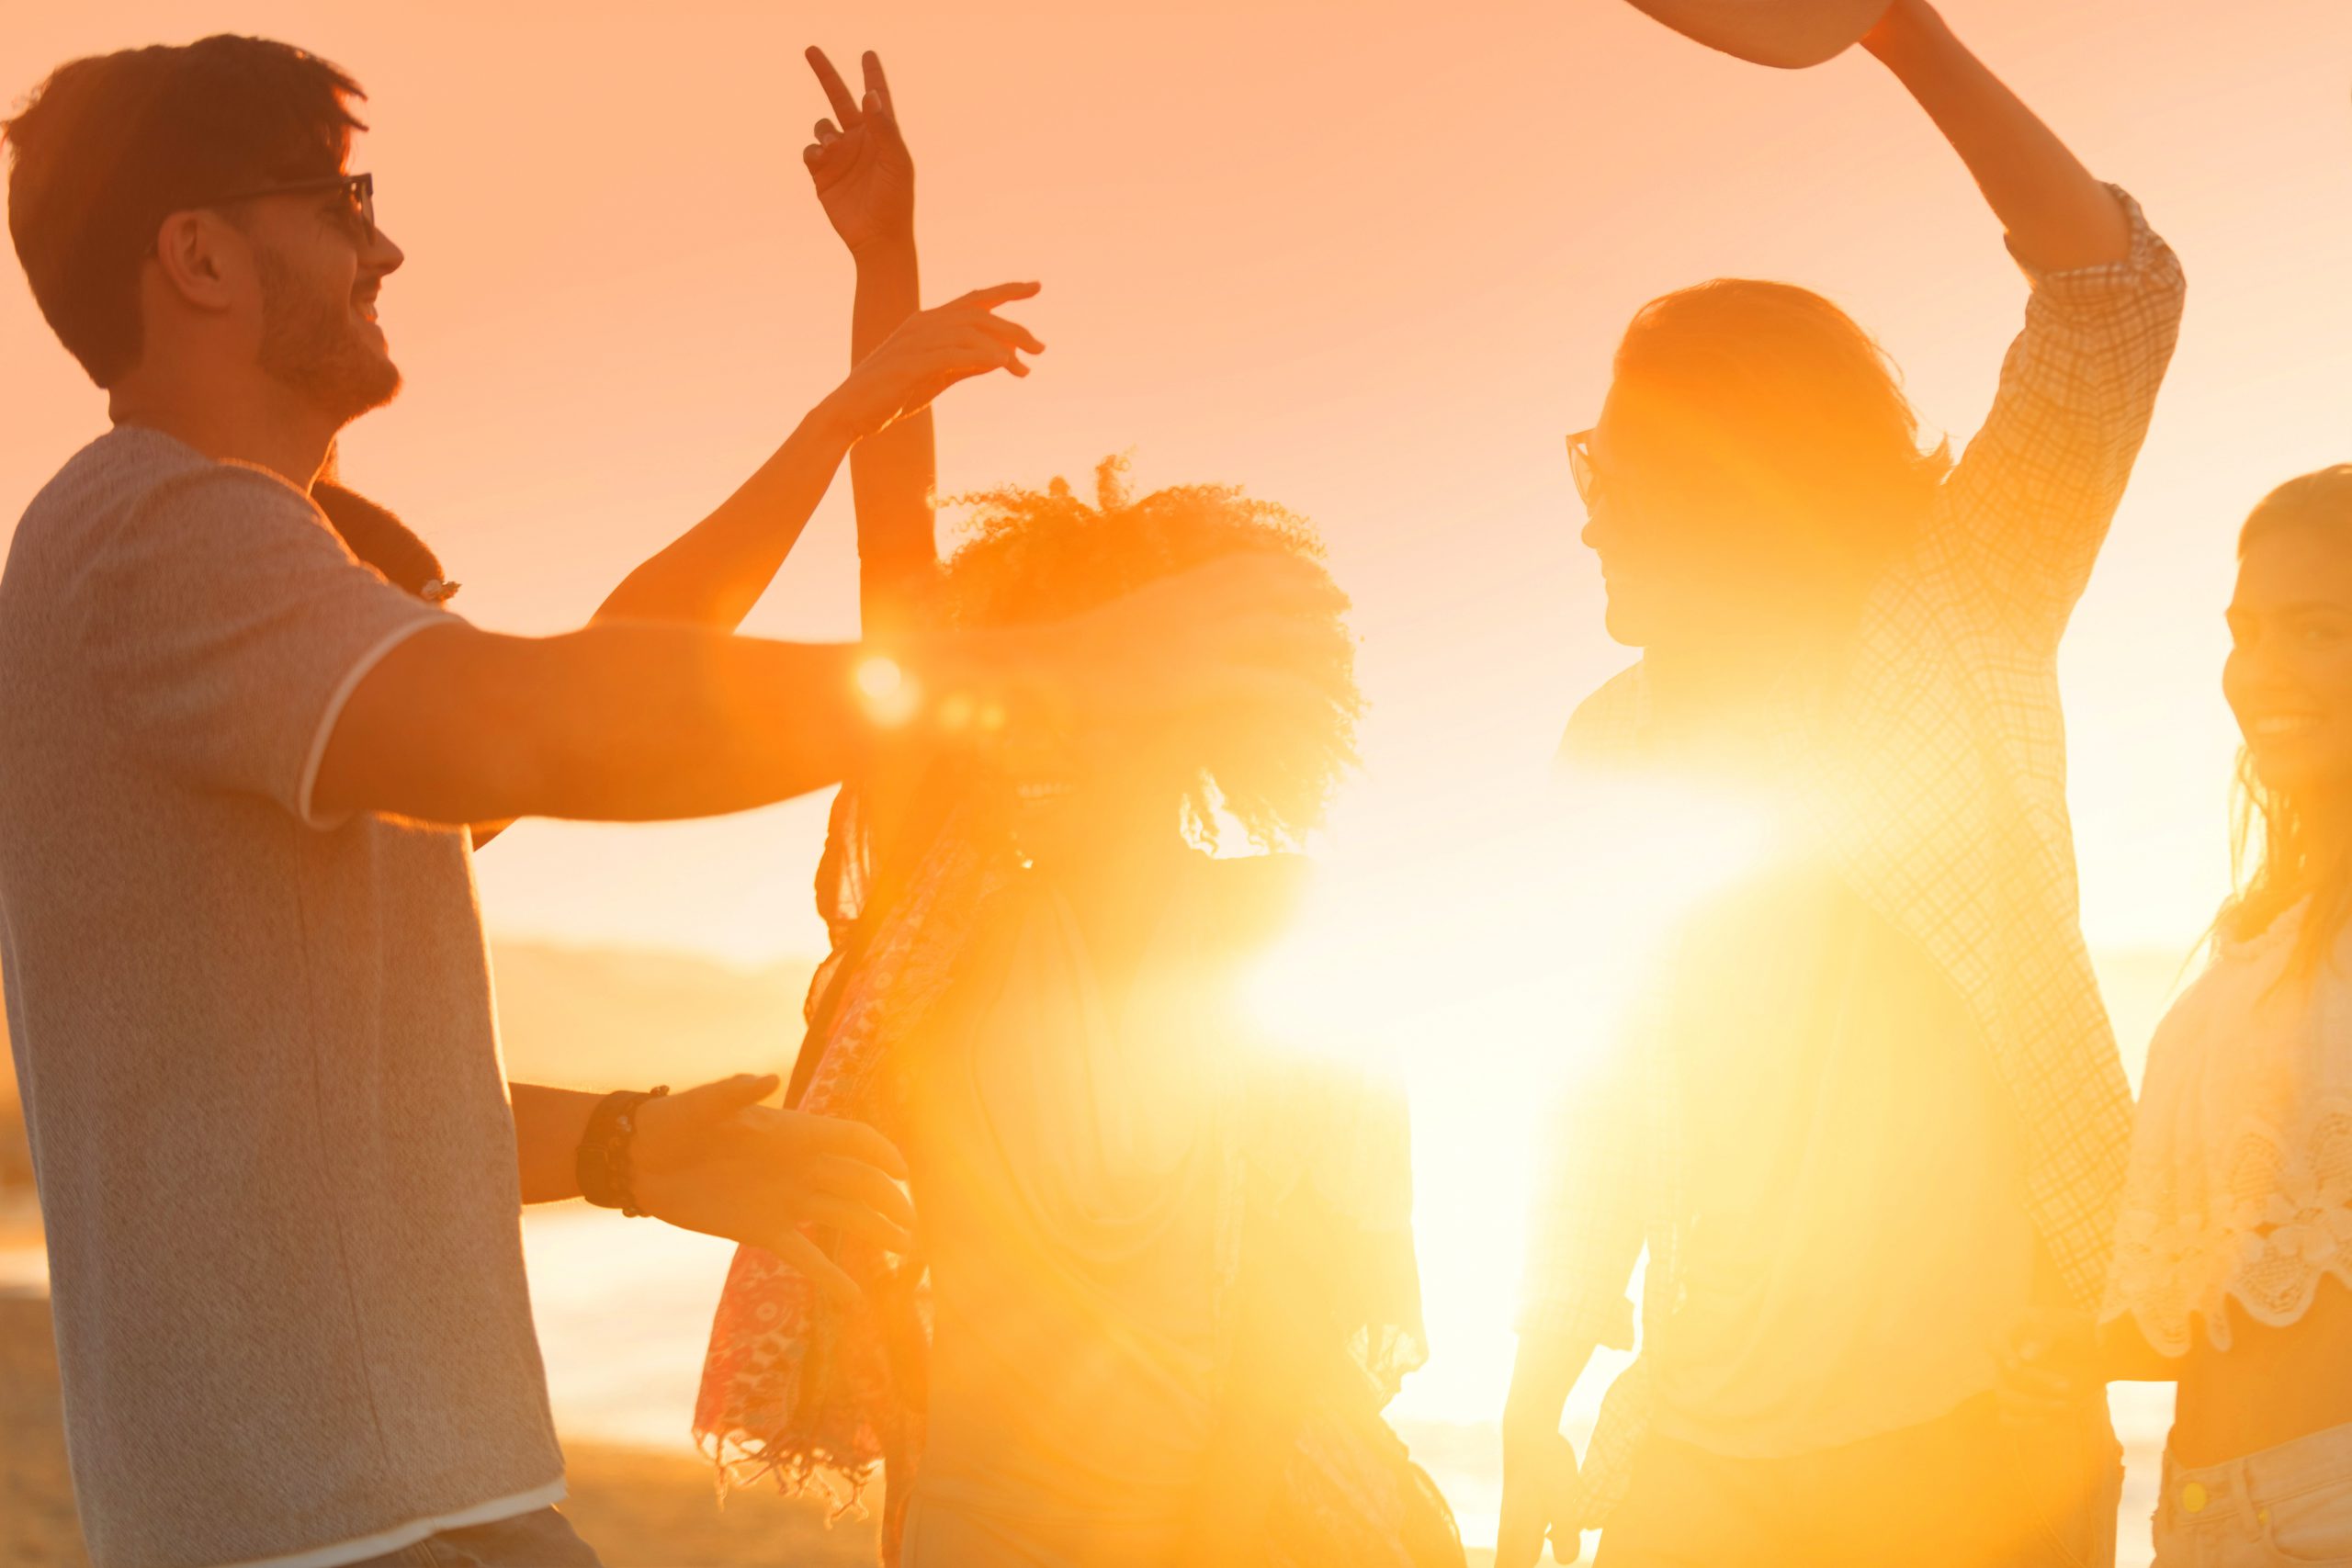 Group of friends dancing and celebrating on the beach at sunrise/sunset. They are very happy, smiling and laughing. Some have their arms raised. The sea and sun can be seen in the background. Defocussed with focus on background